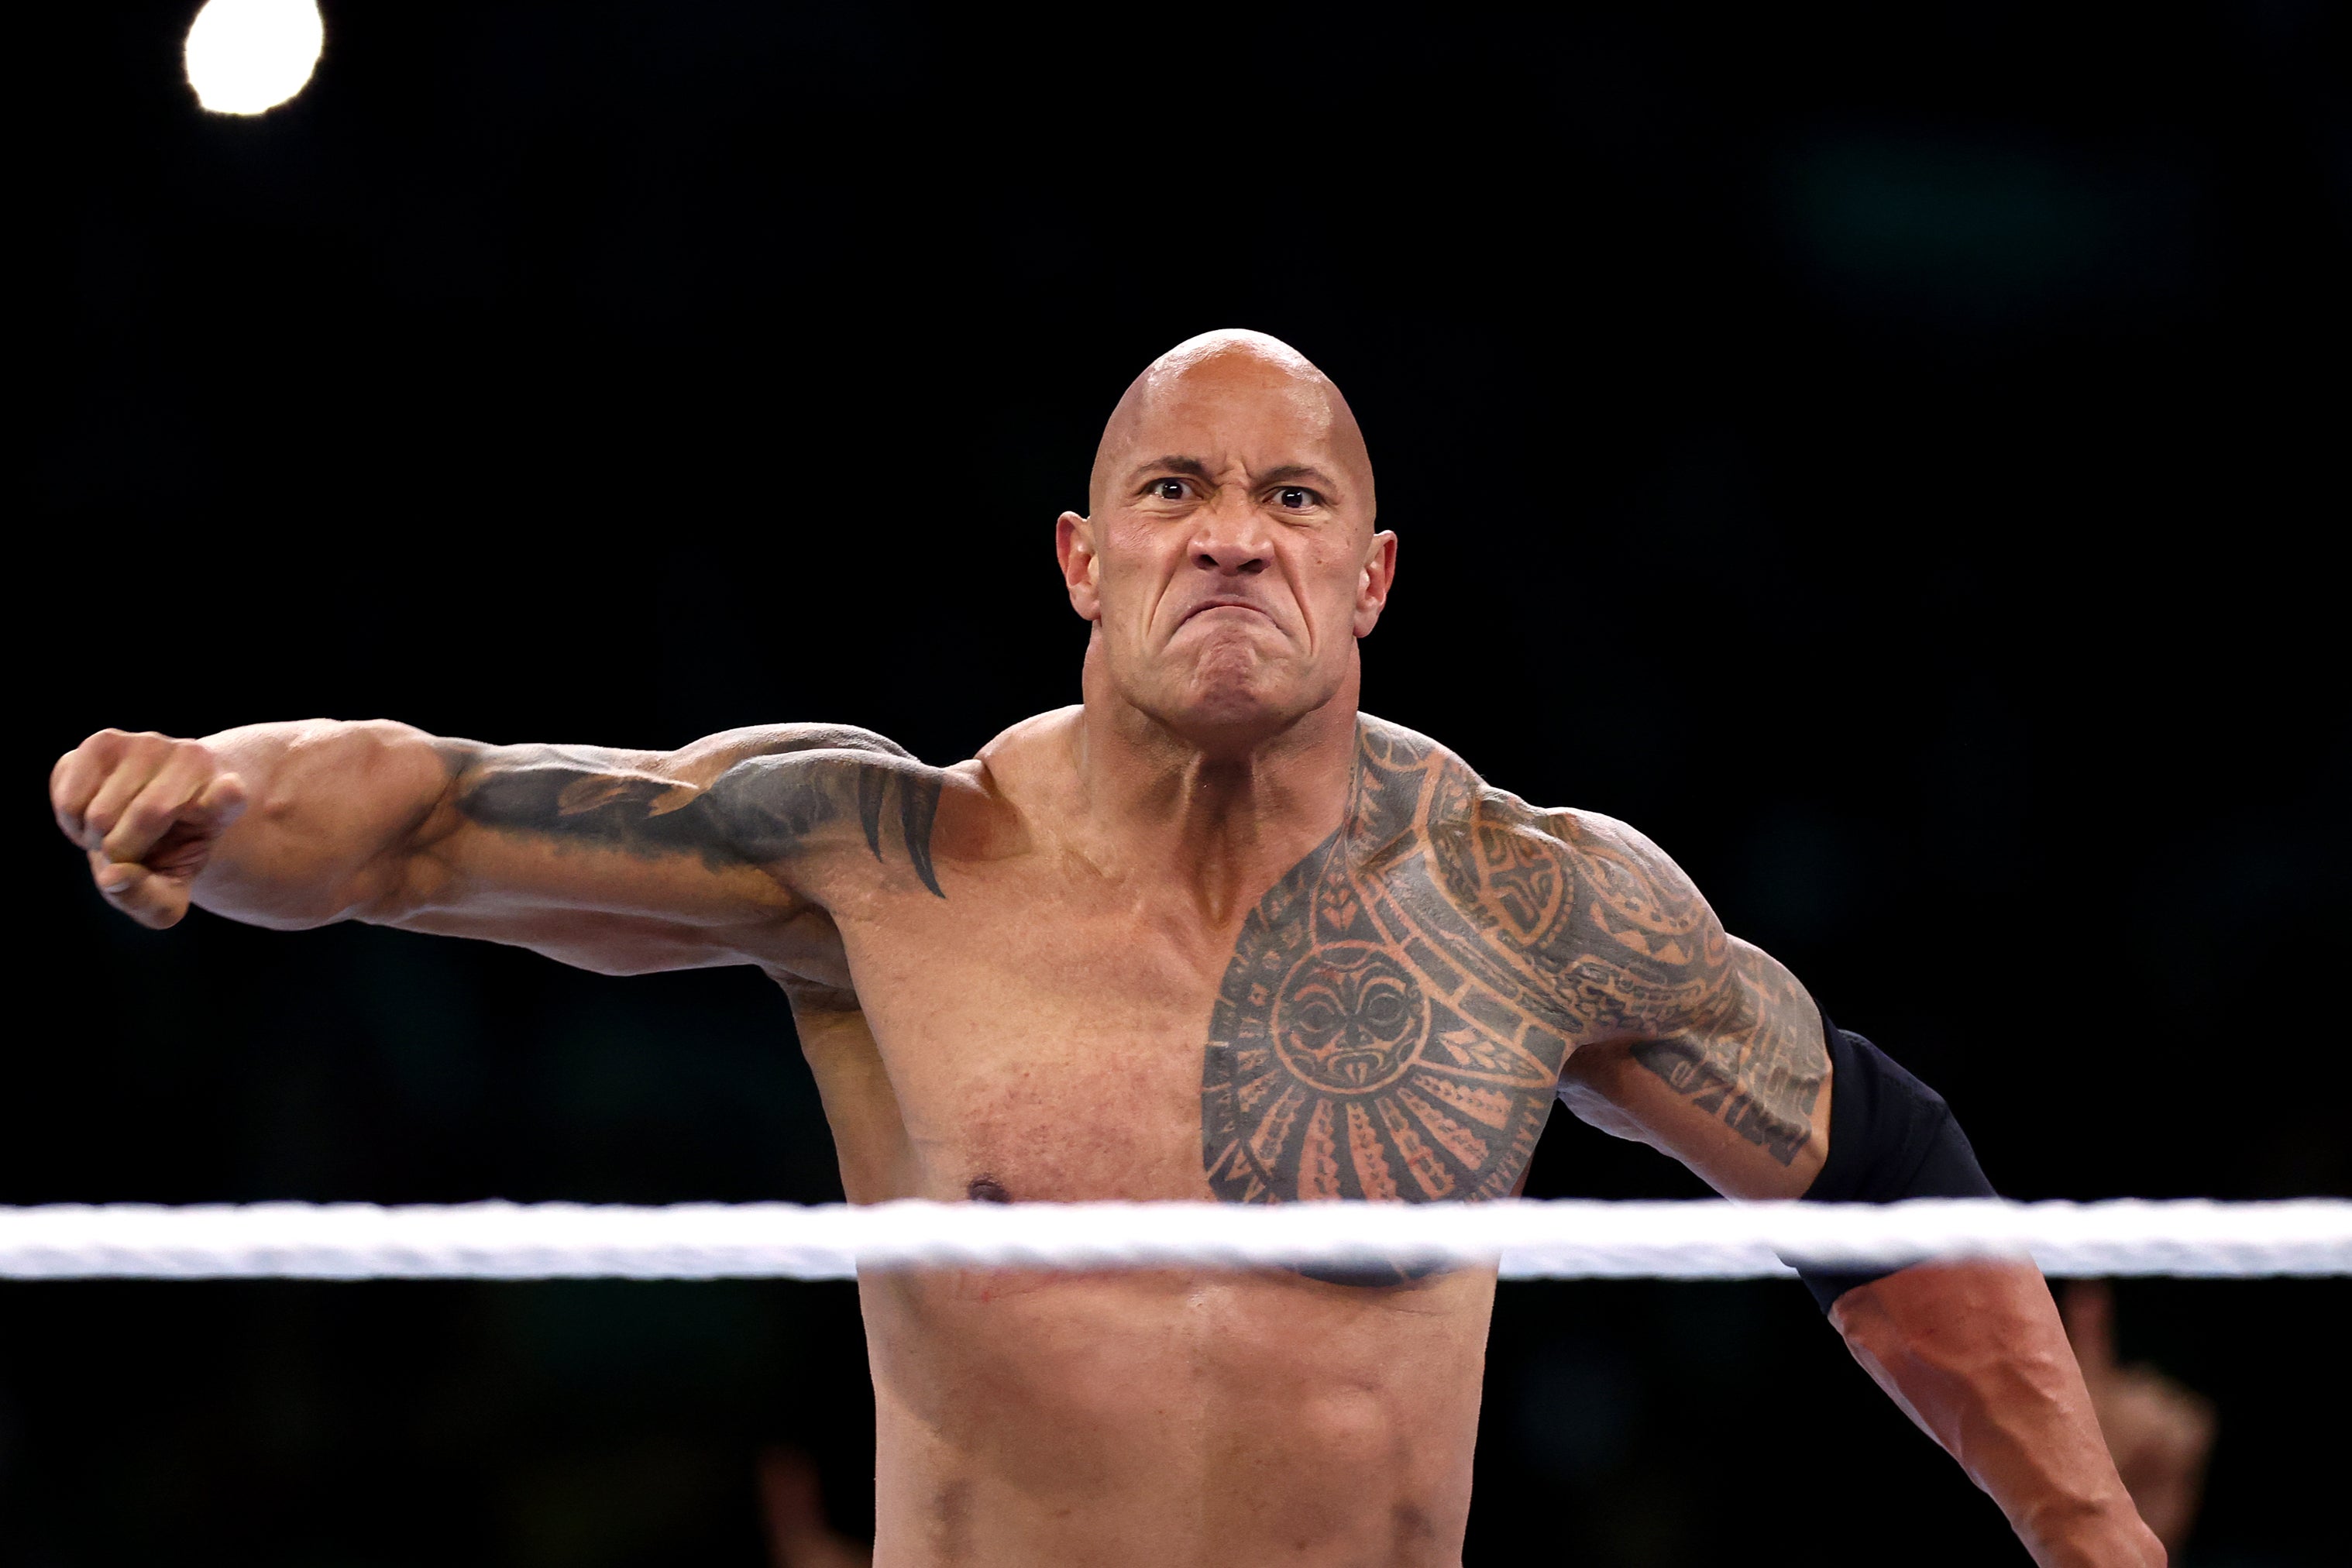 The Rock and Reigns defeated Rhodes and Seth Rollins